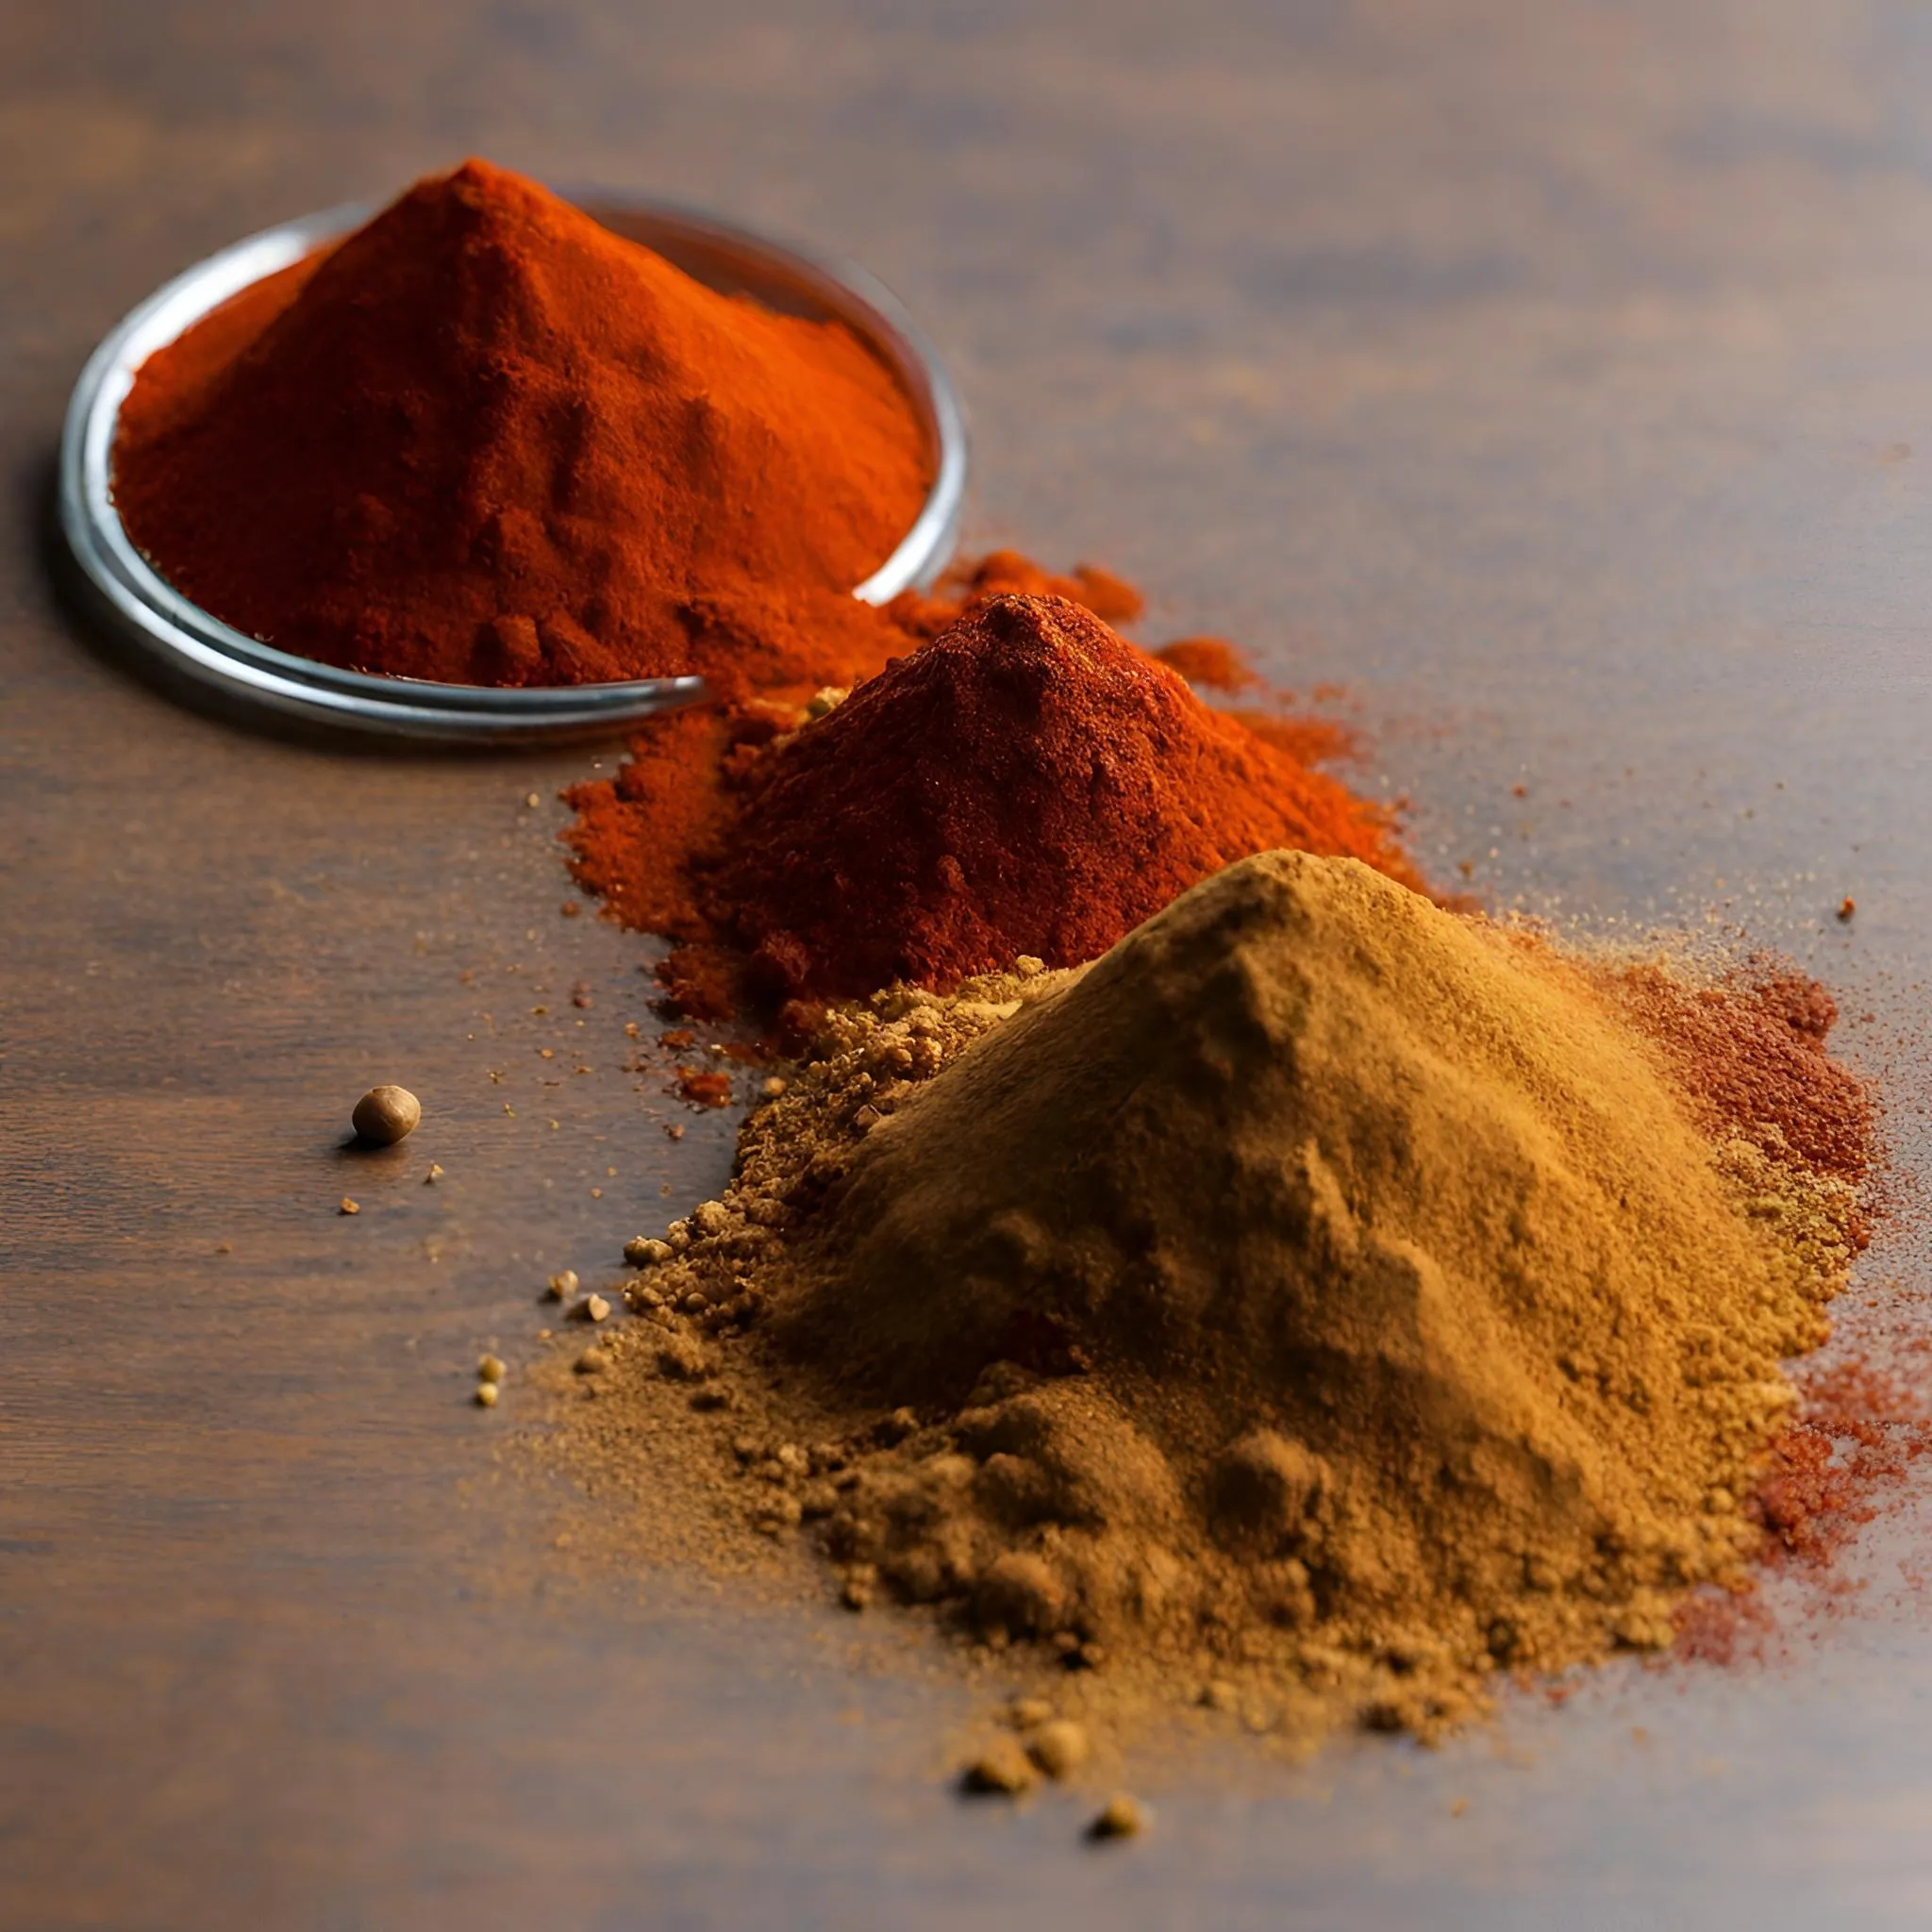 A pile of powdered Cajun and paprika spices sitting on a wooden table. The Cajun spice is a reddish-brown color, while the paprika spice is a brighter red.